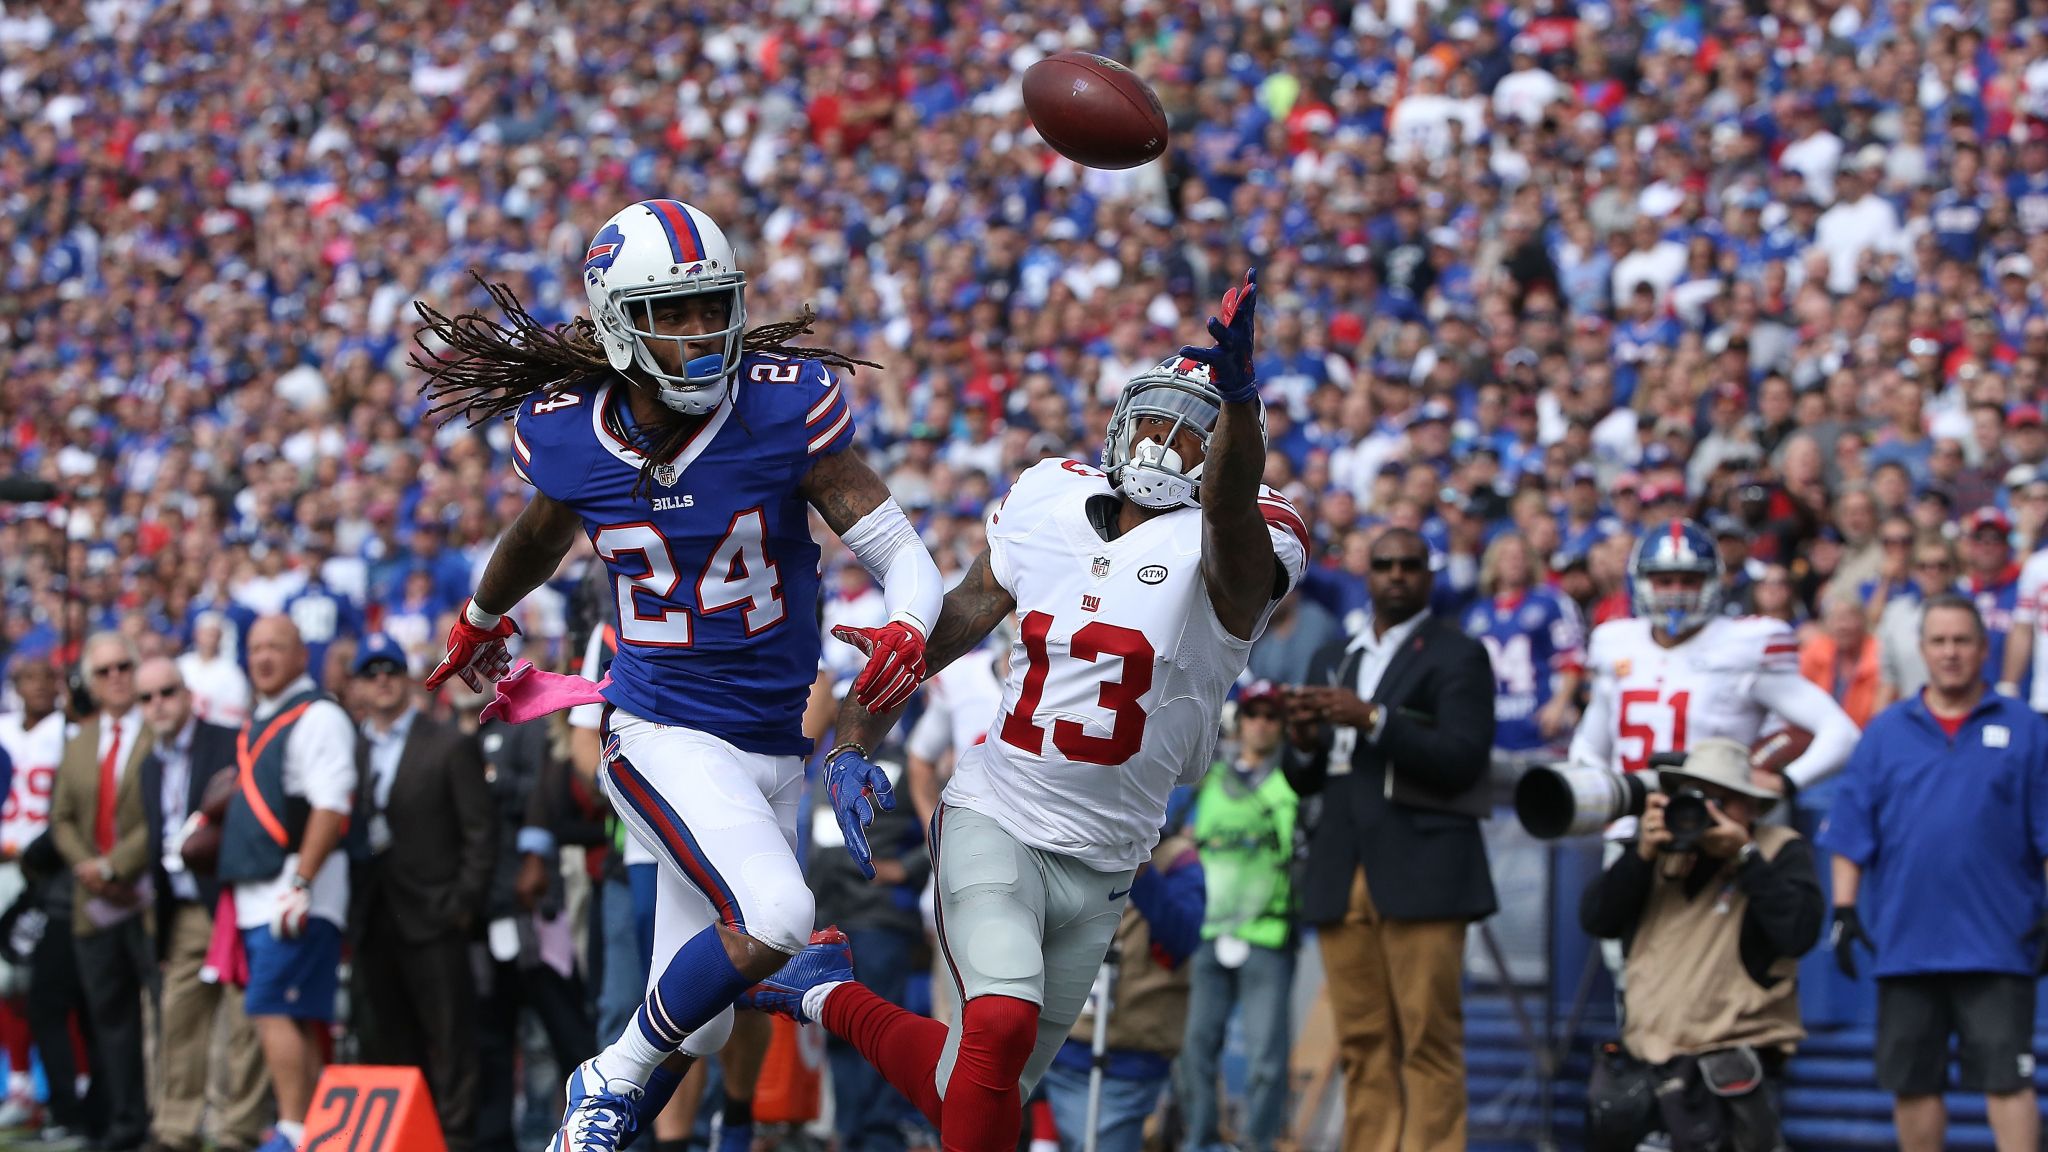 Odell Beckham Jr. Repeats the Amazing One-Handed Catch..Out of Bounds, Giants vs. Bills